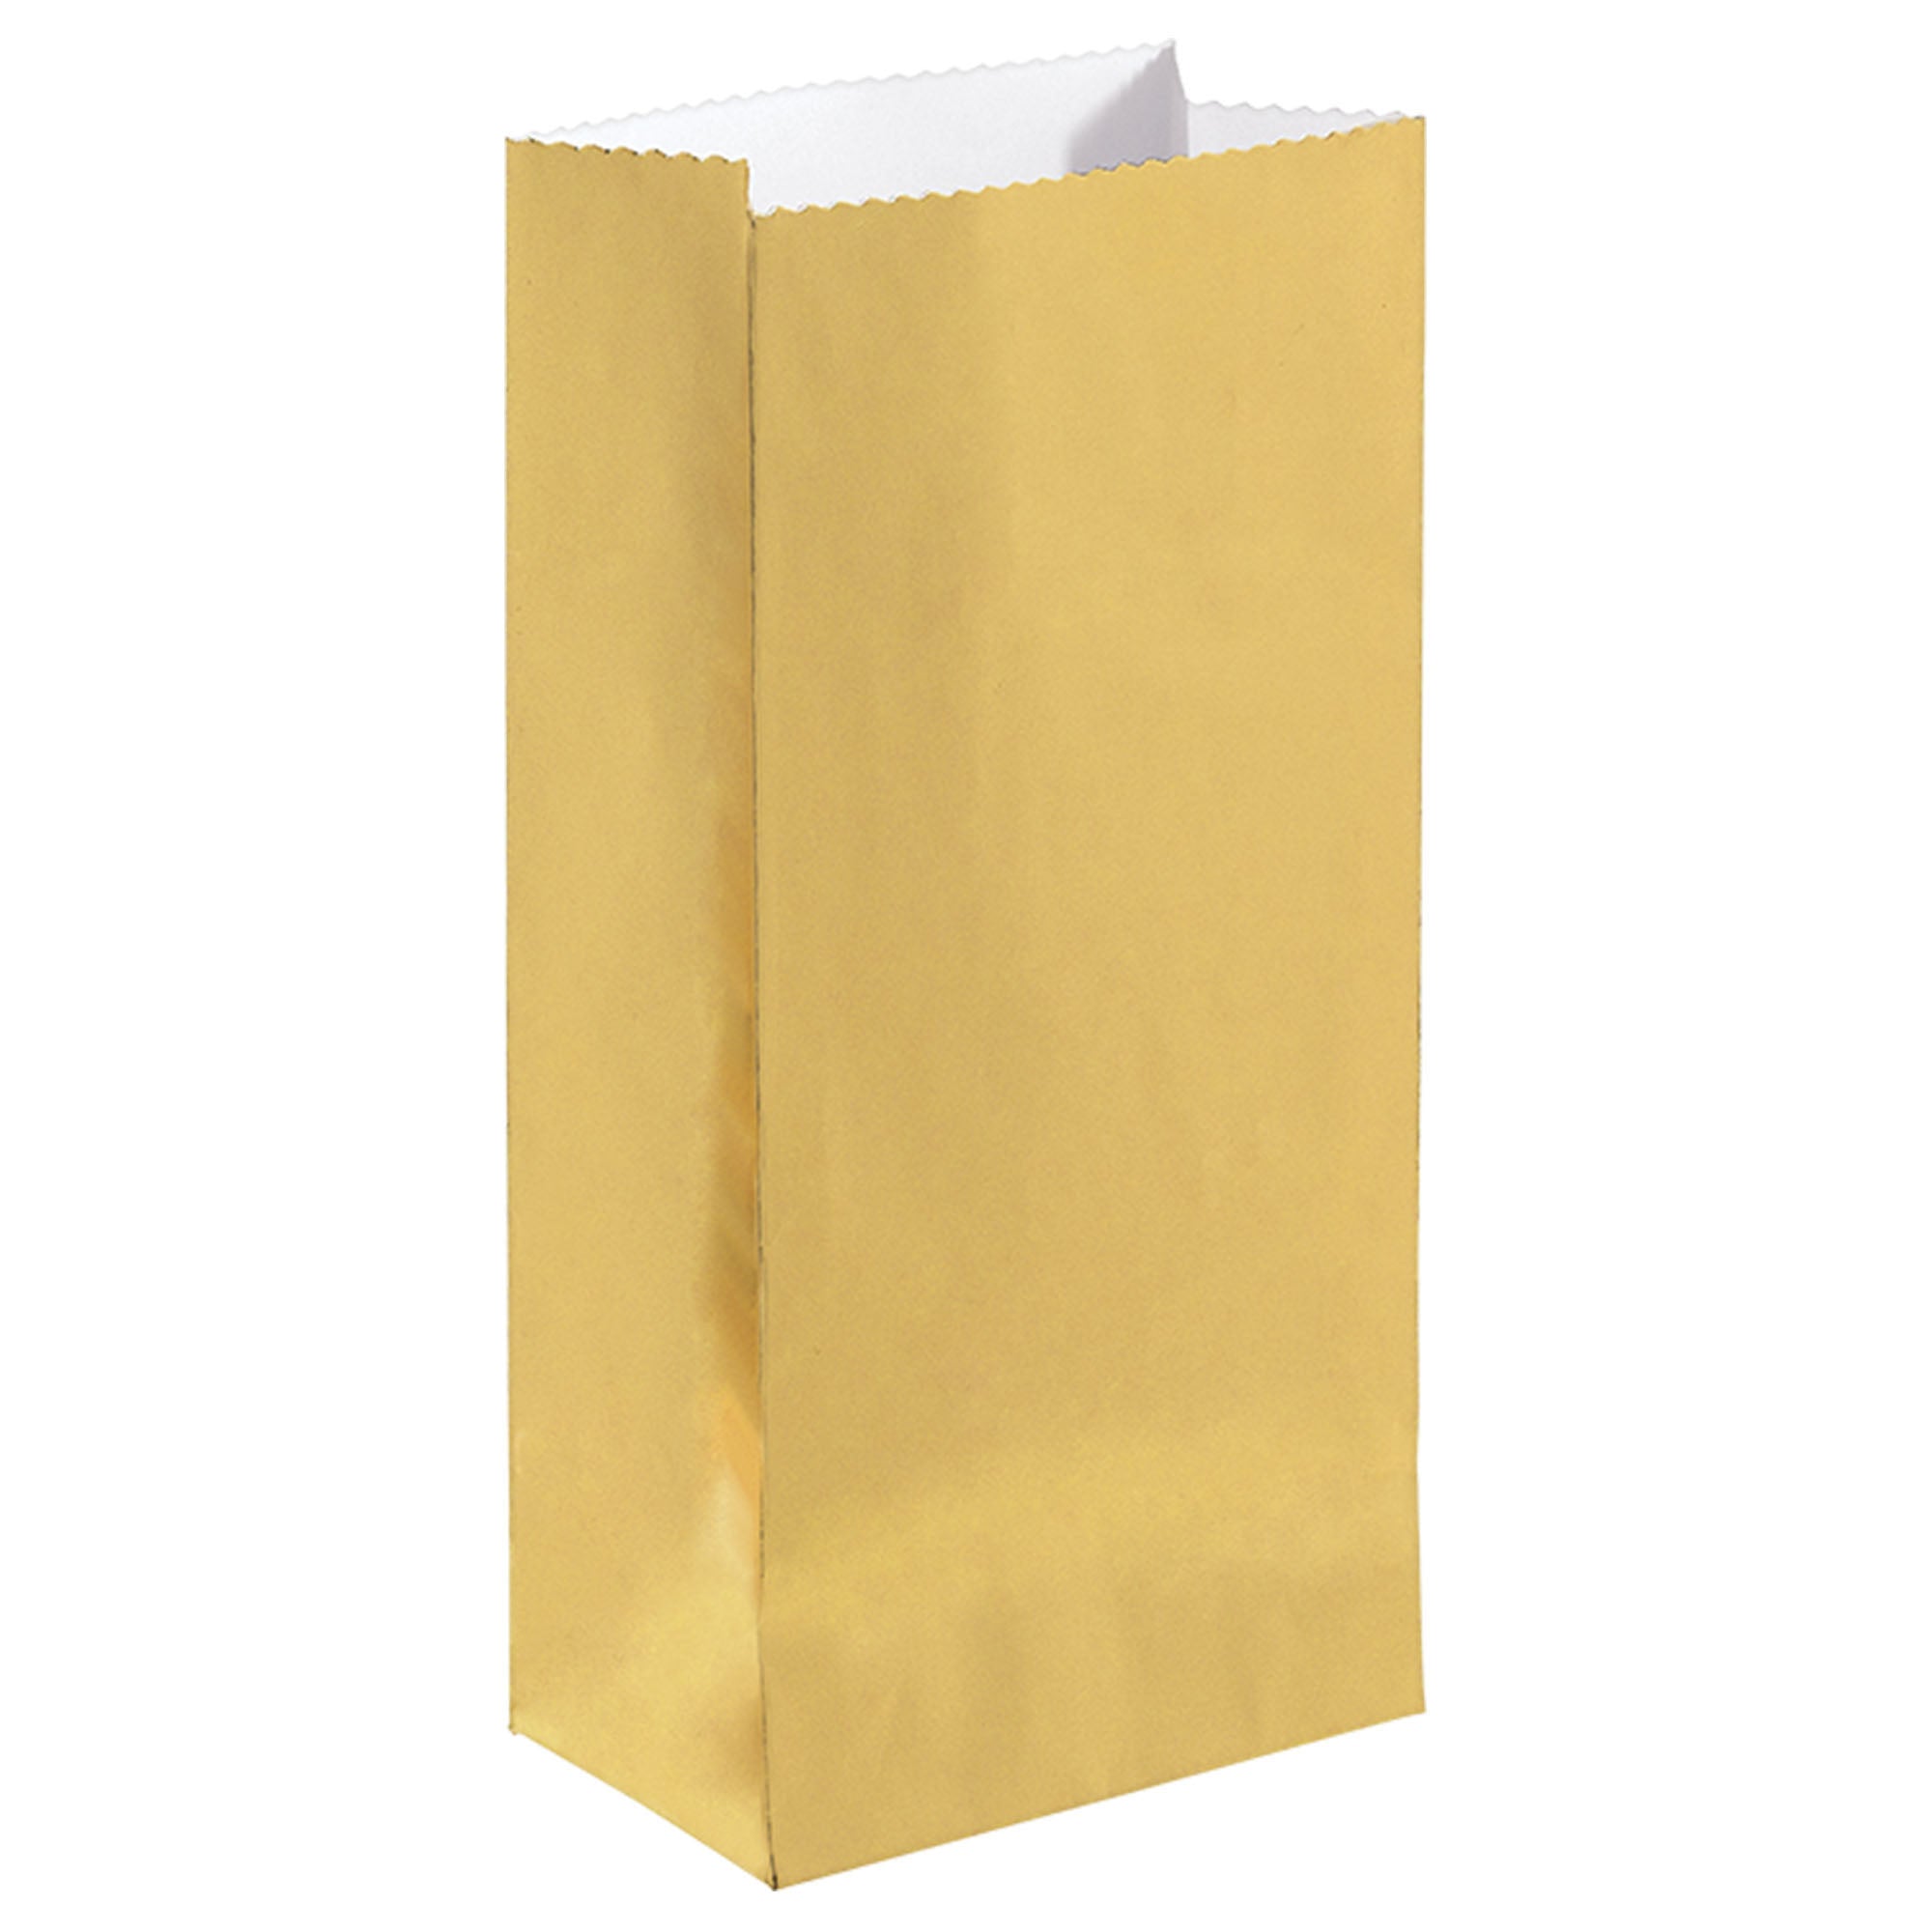 12 Mini Packaged Paper Bags  Gold  6.5x3x2in